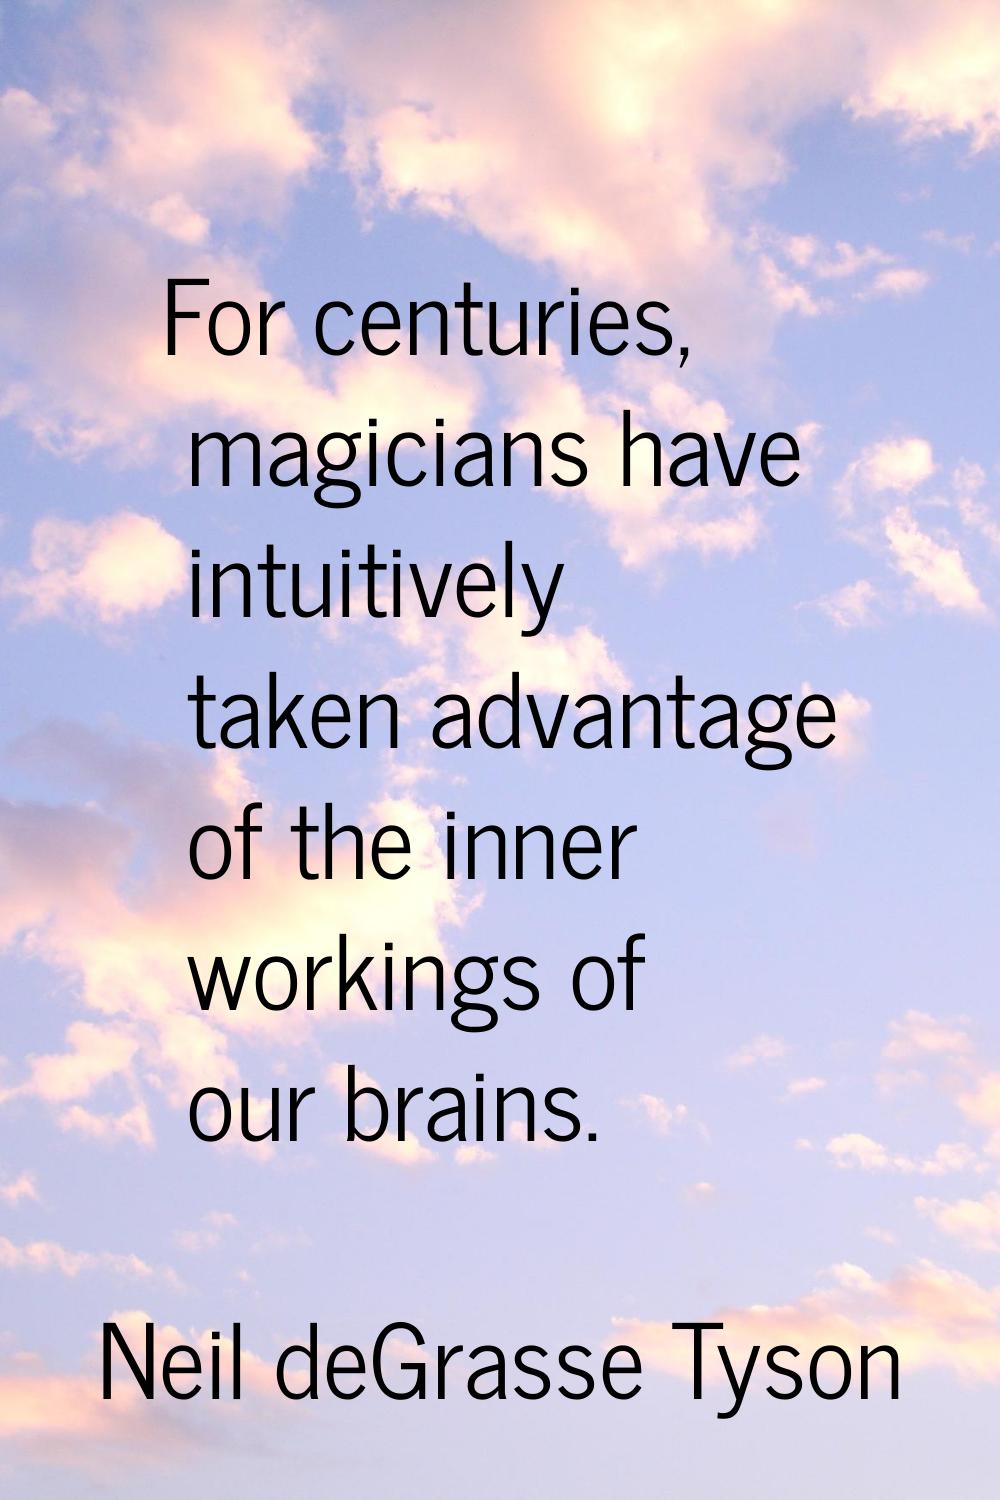 For centuries, magicians have intuitively taken advantage of the inner workings of our brains.